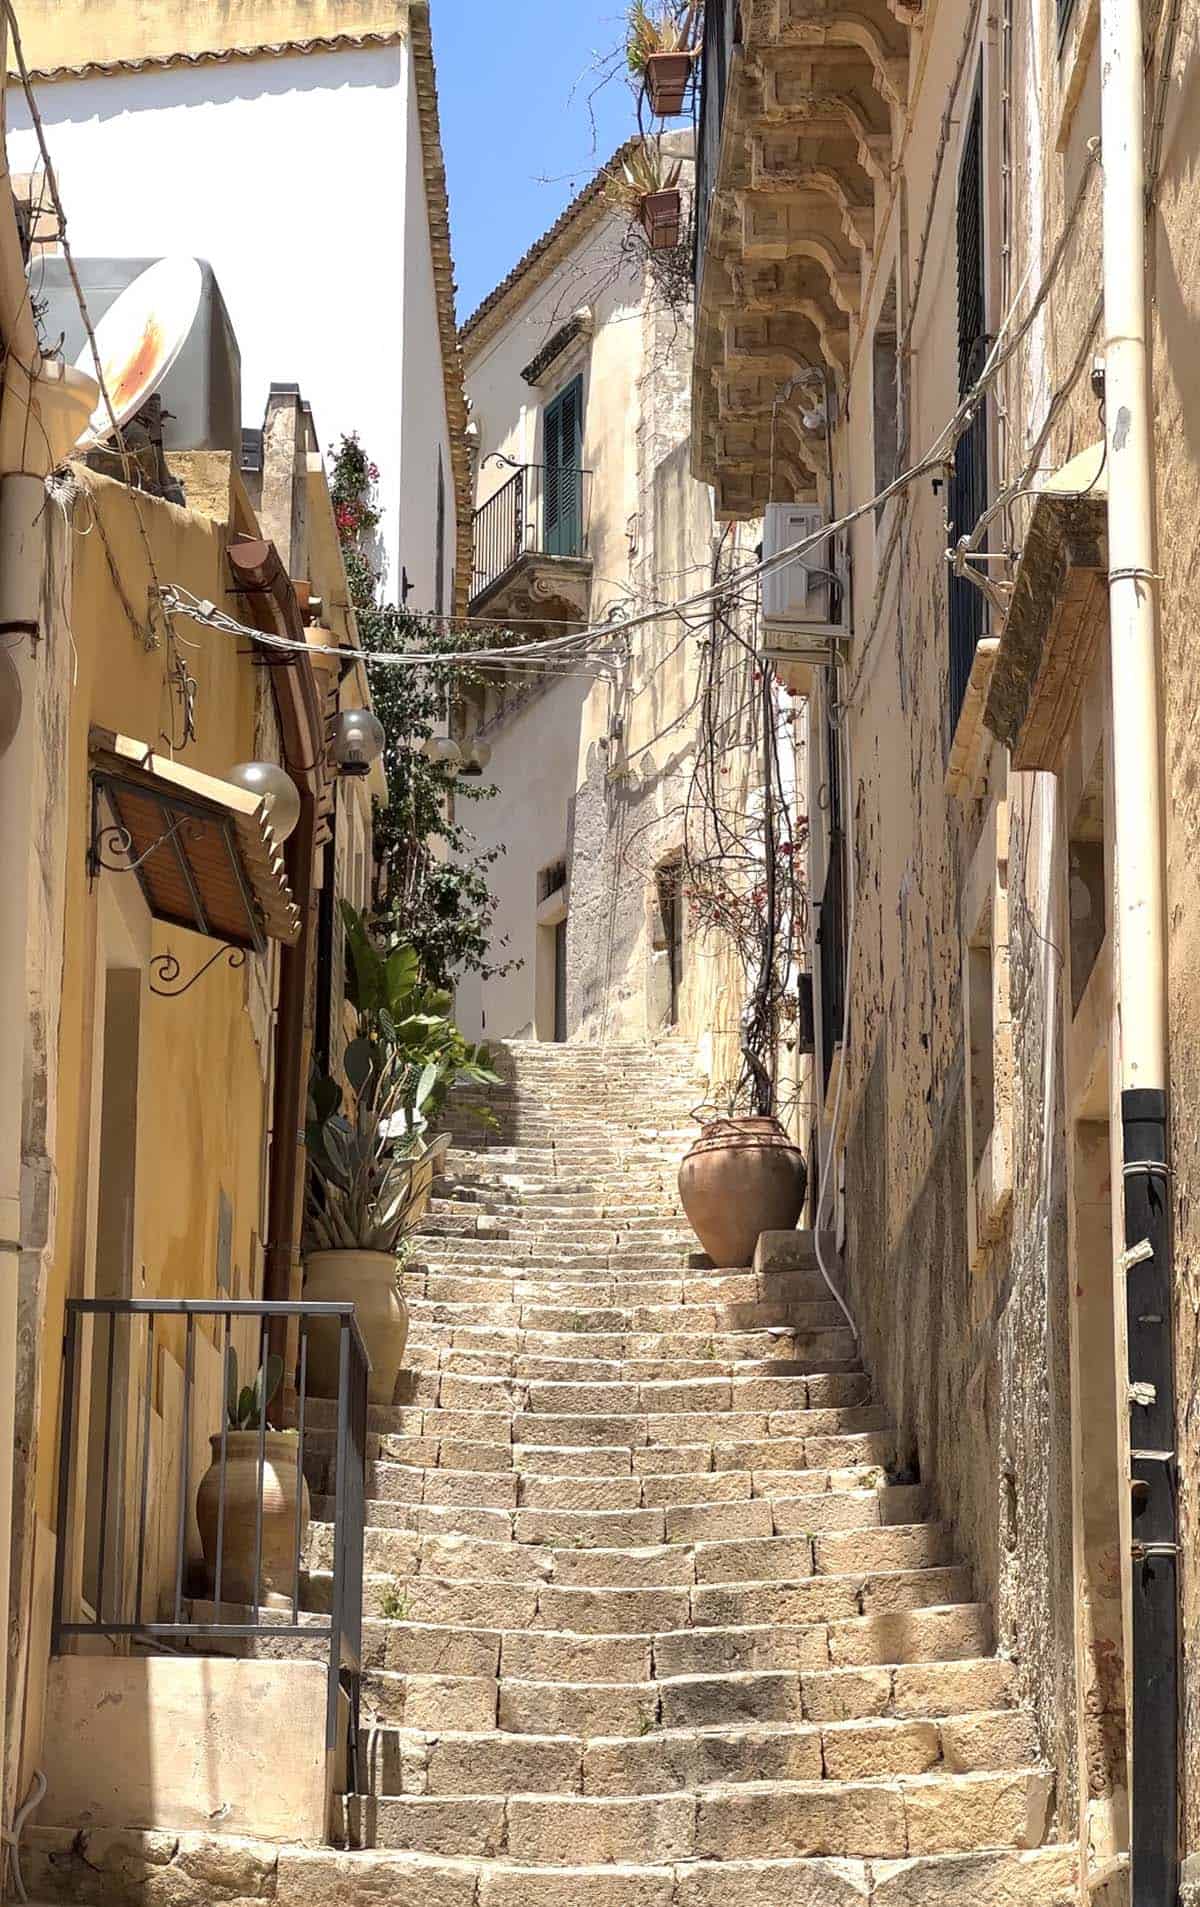 An image of a terracotta staircase in Noto, Sicily